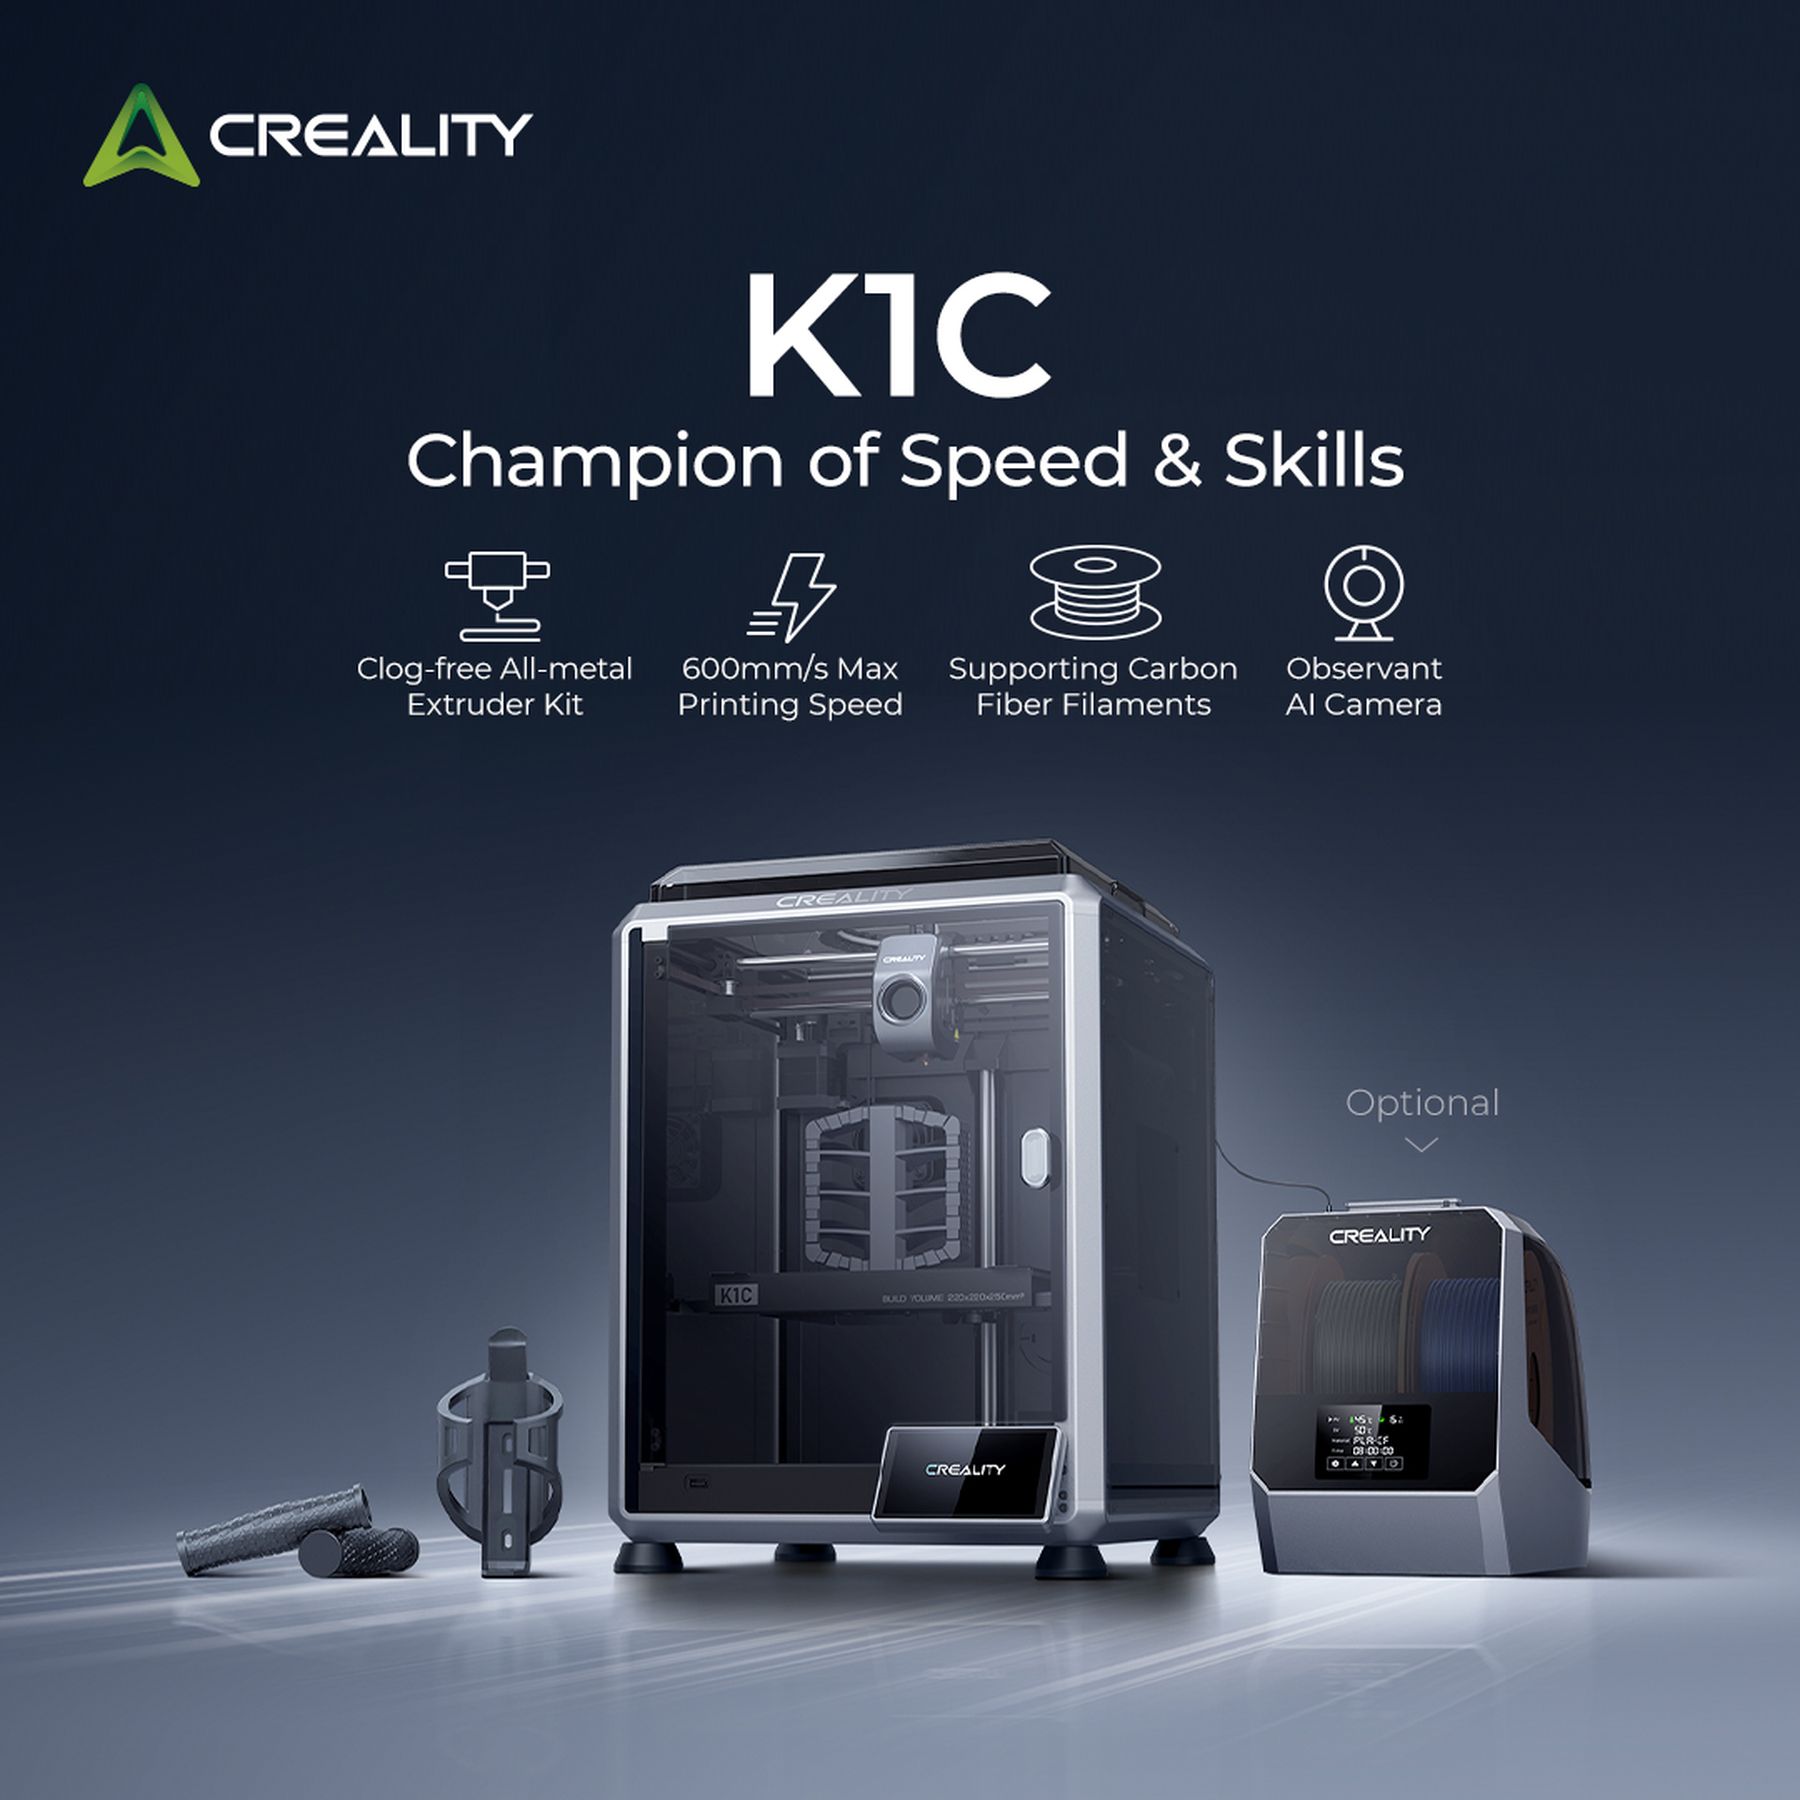 Creality K1C 3D Printer | Creality K1C 3D Printer: New Champion of Speed and Skill